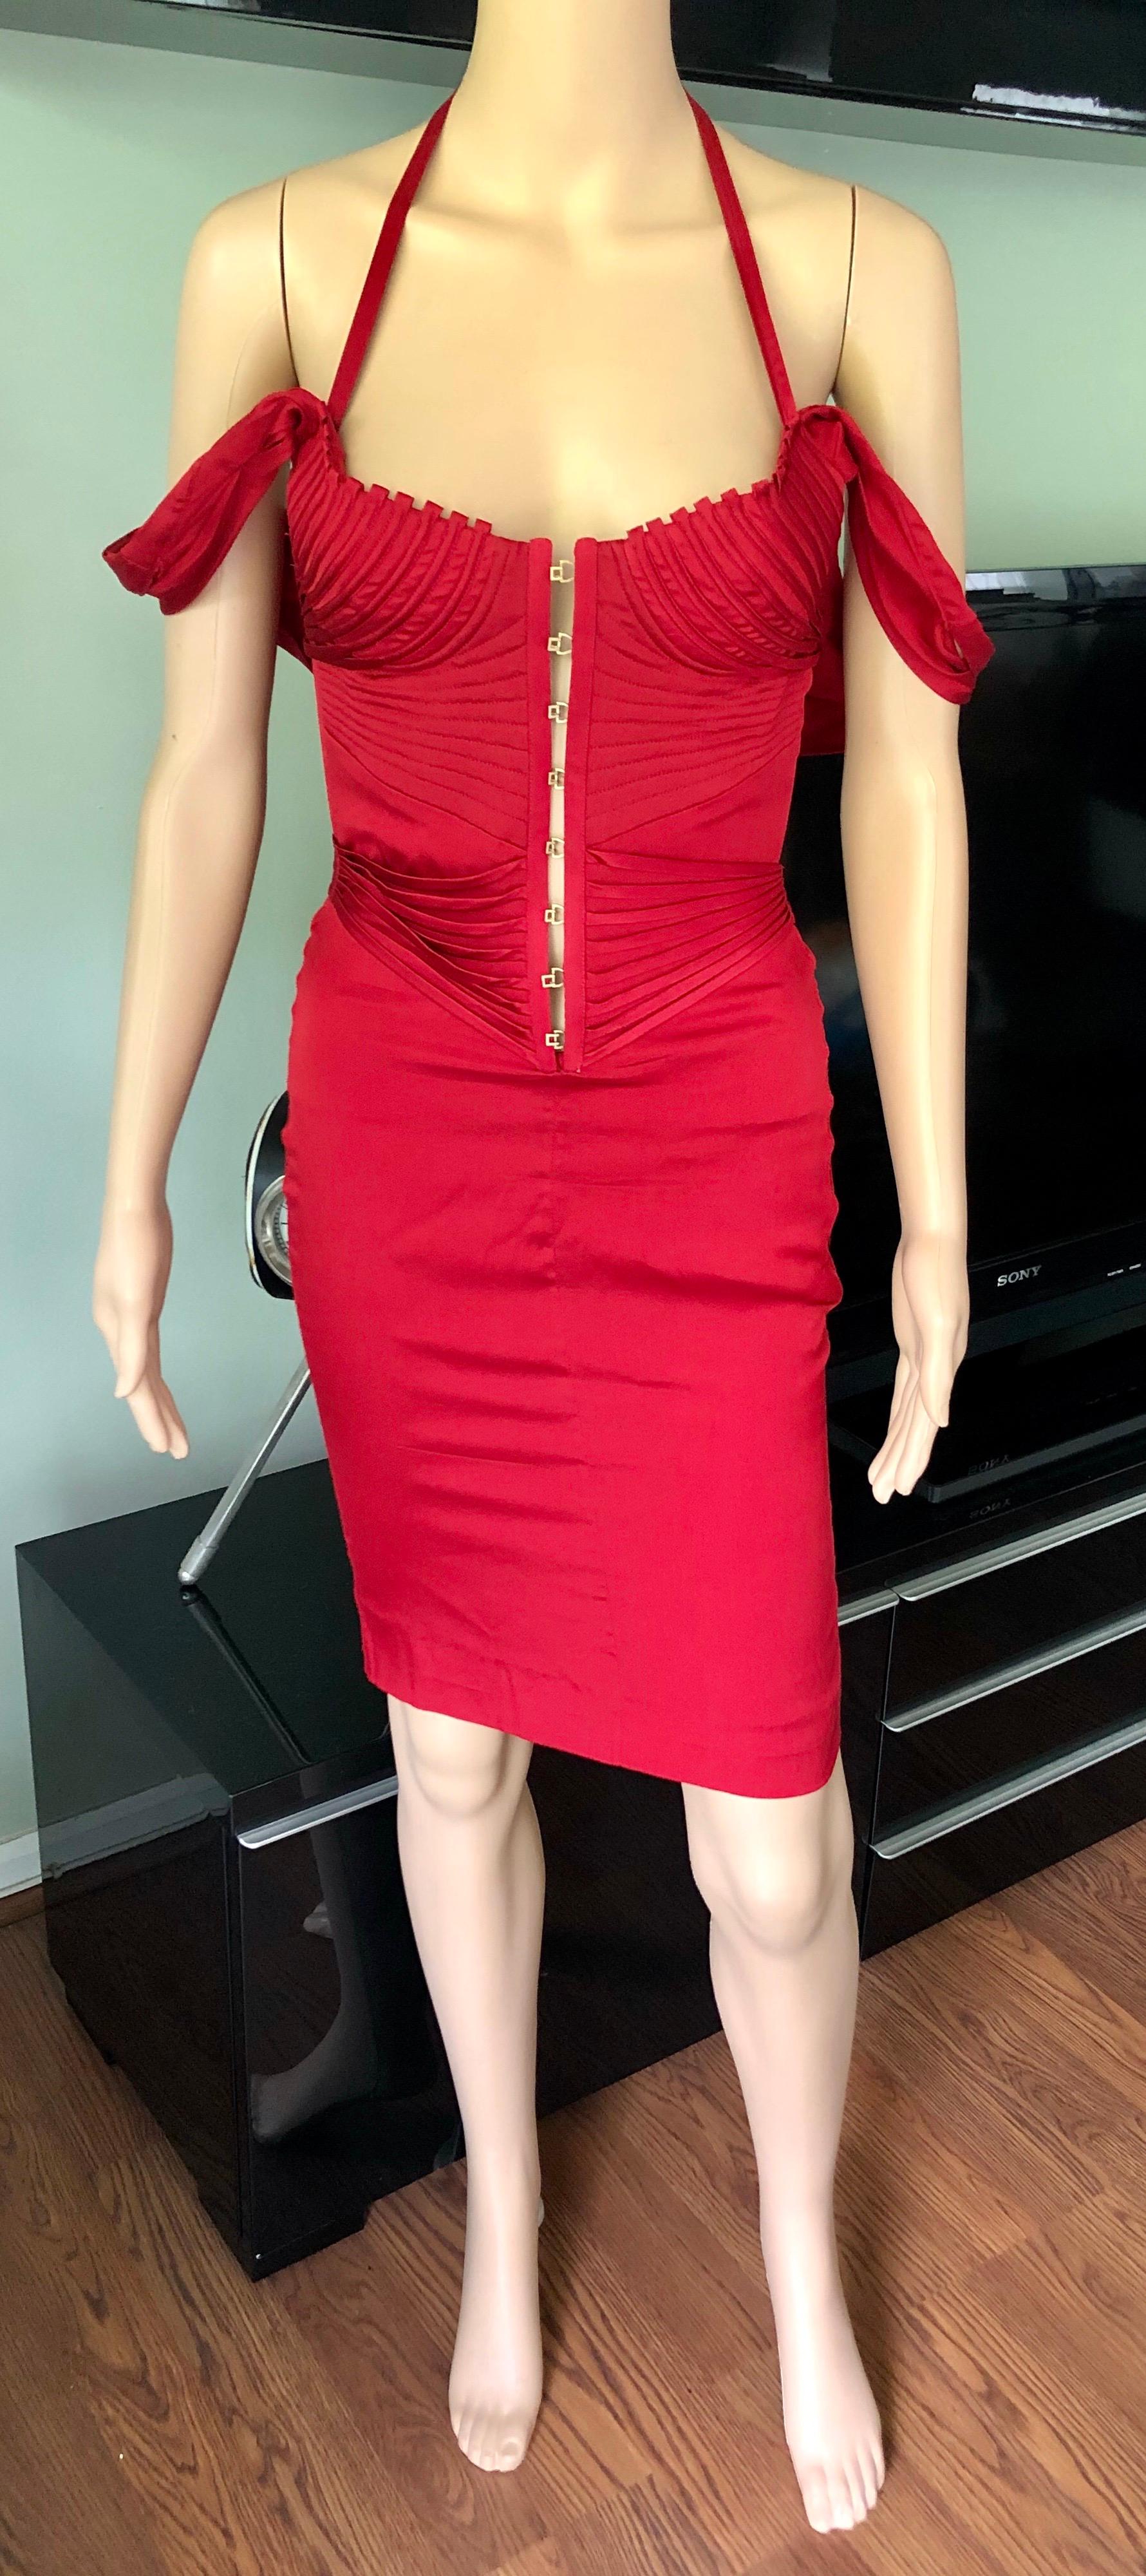 tom ford 2003 red dress